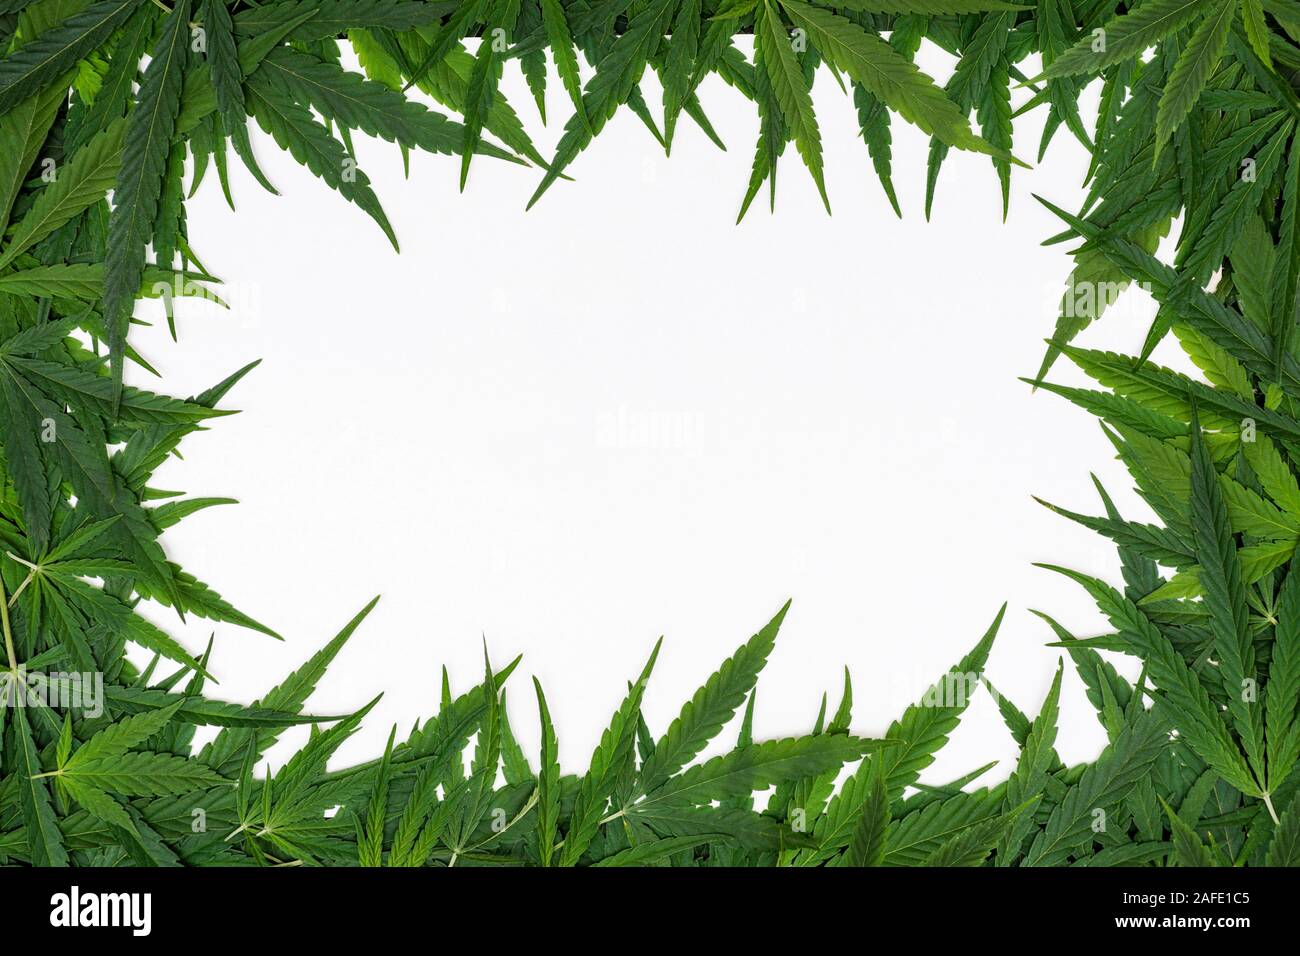 Creative layout made of green cannabis leaves. Green cannabis leafs frame with usable copy space in the middle. Stock Photo